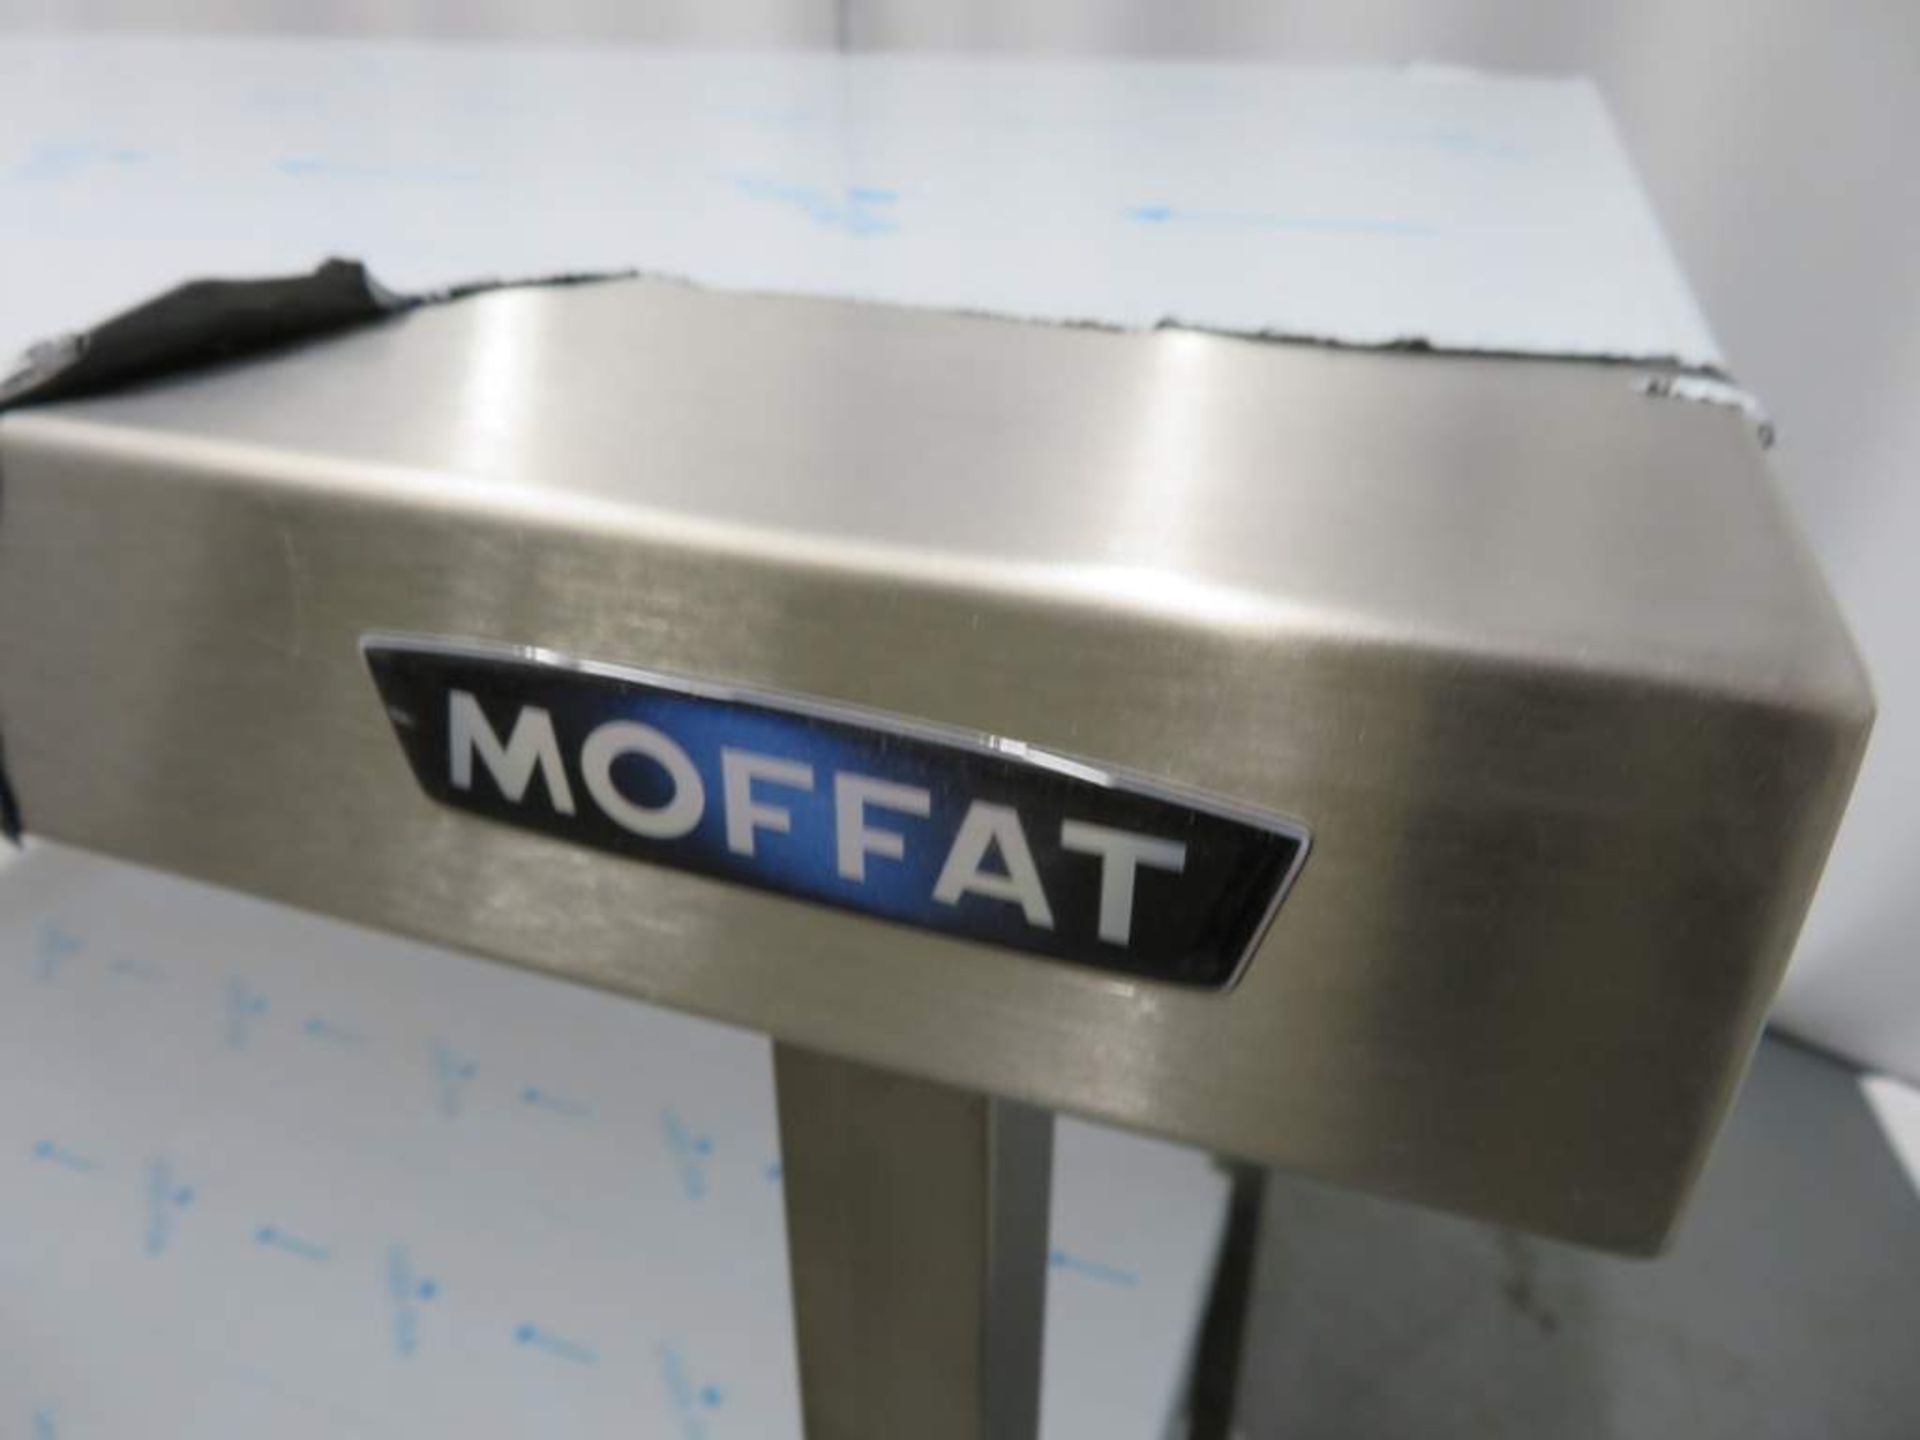 MOFFAT STAINLESS STEEL KITCHEN PREPERATION TABLE WITH UNDER SHELF - Image 5 of 6